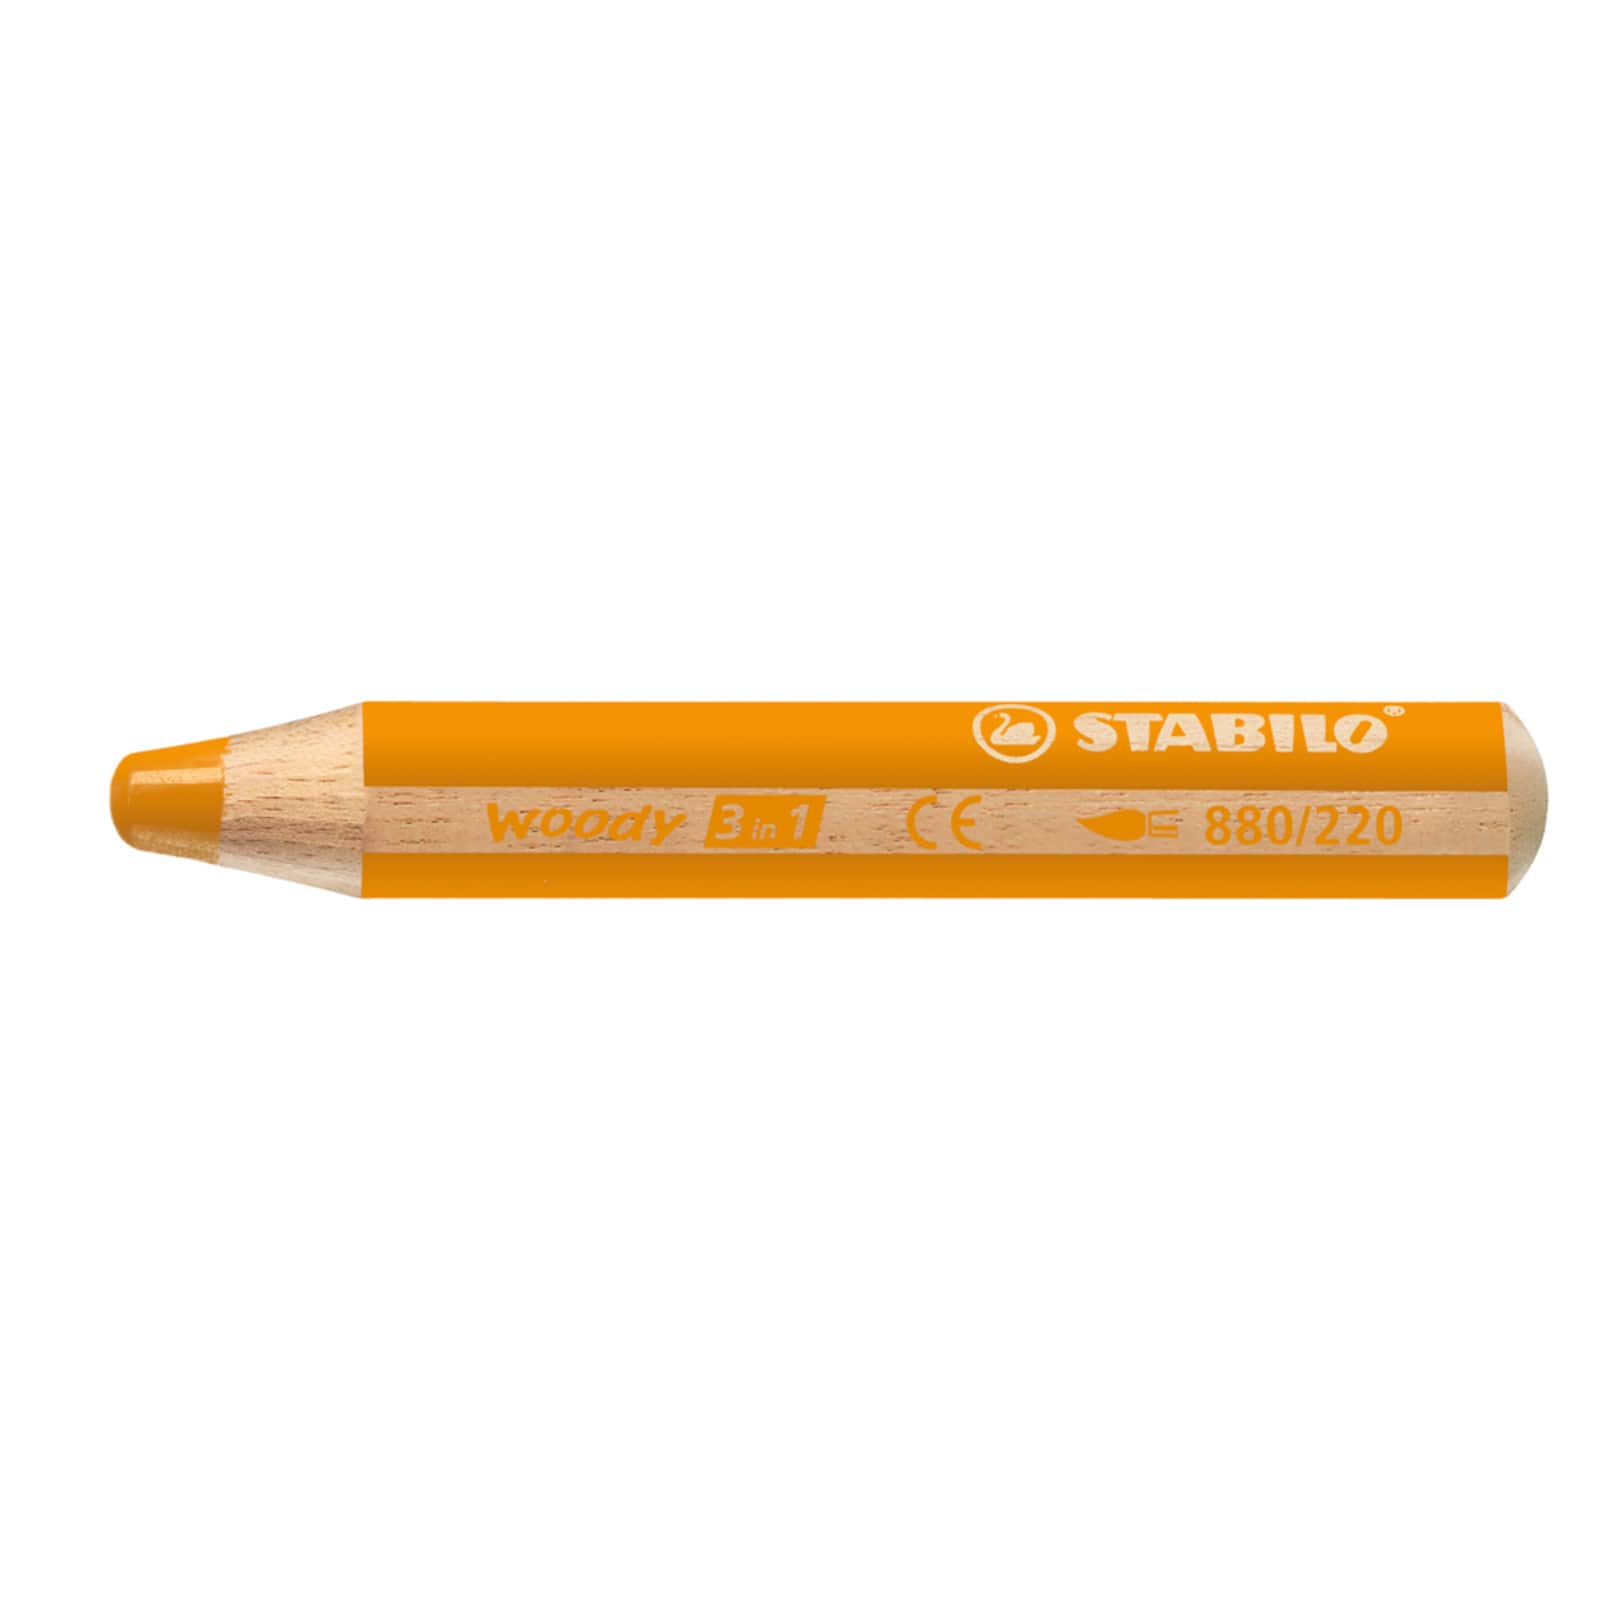 STABILO Woody 3in1 Thick Colouring Pencils Wax Crayons Watercolour